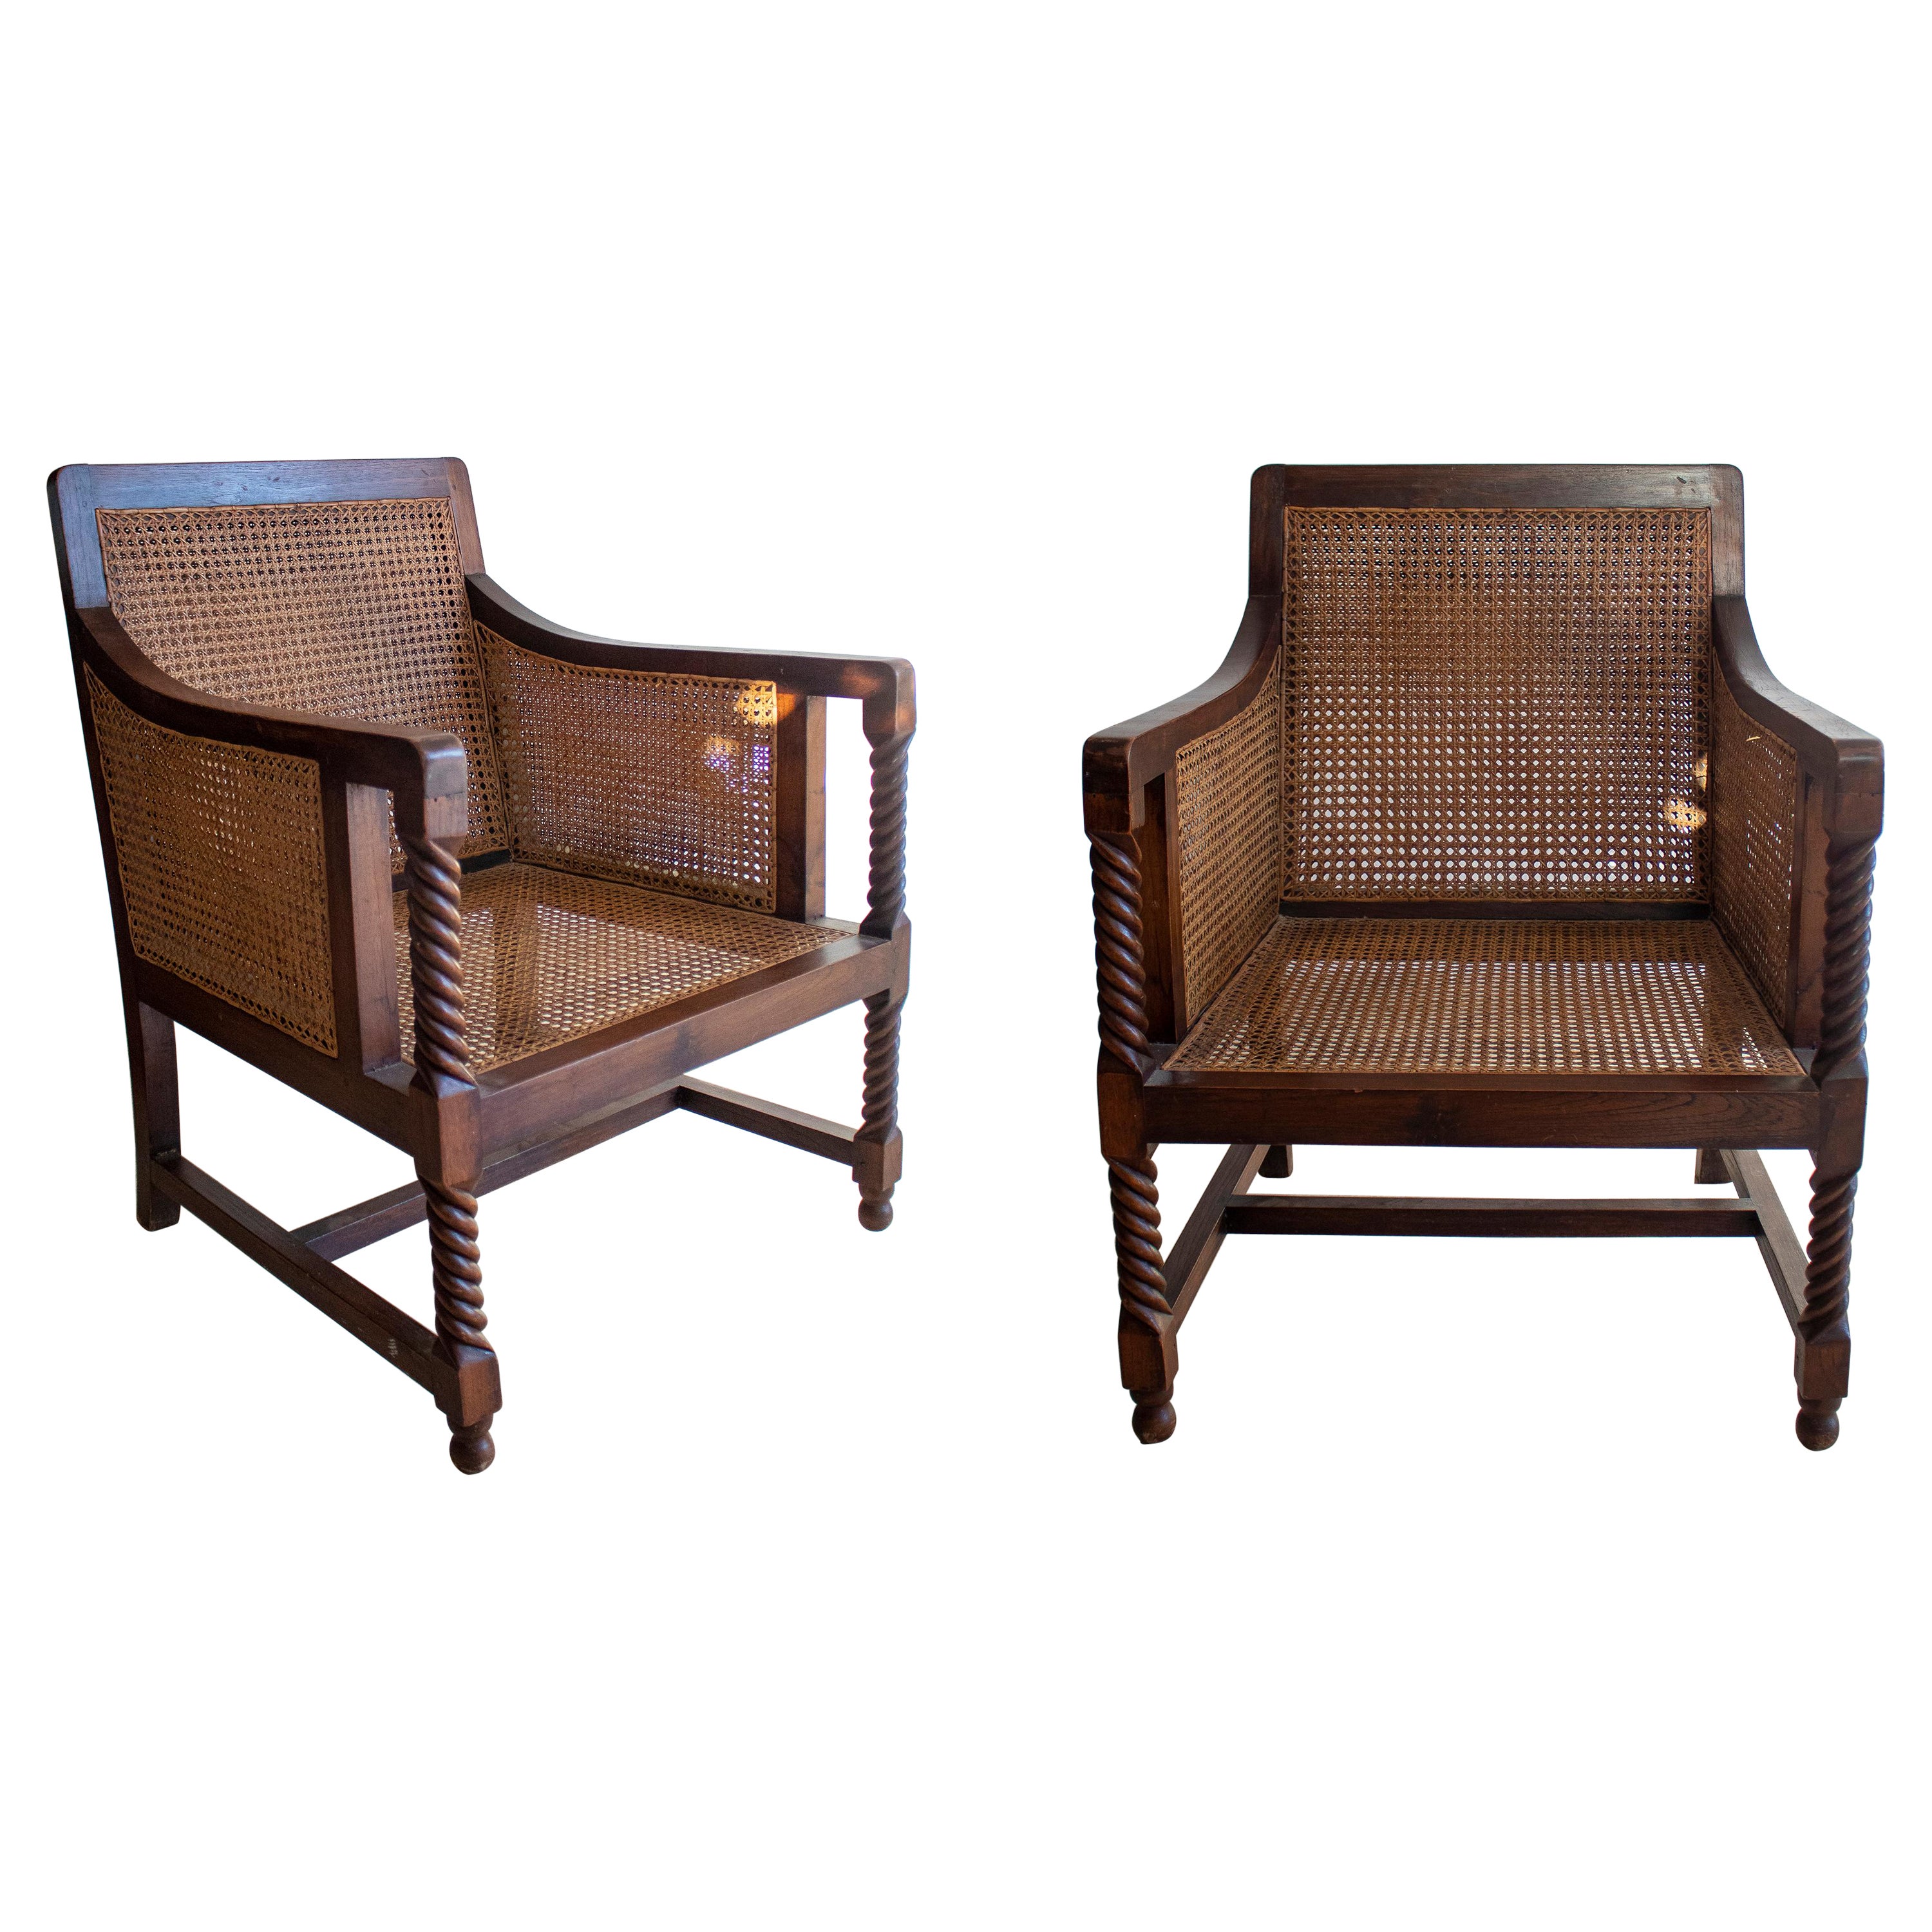 Pair of 1970s Spanish Wood & Woven Cane Sofa Chairs w/ Spindle Armrest Support